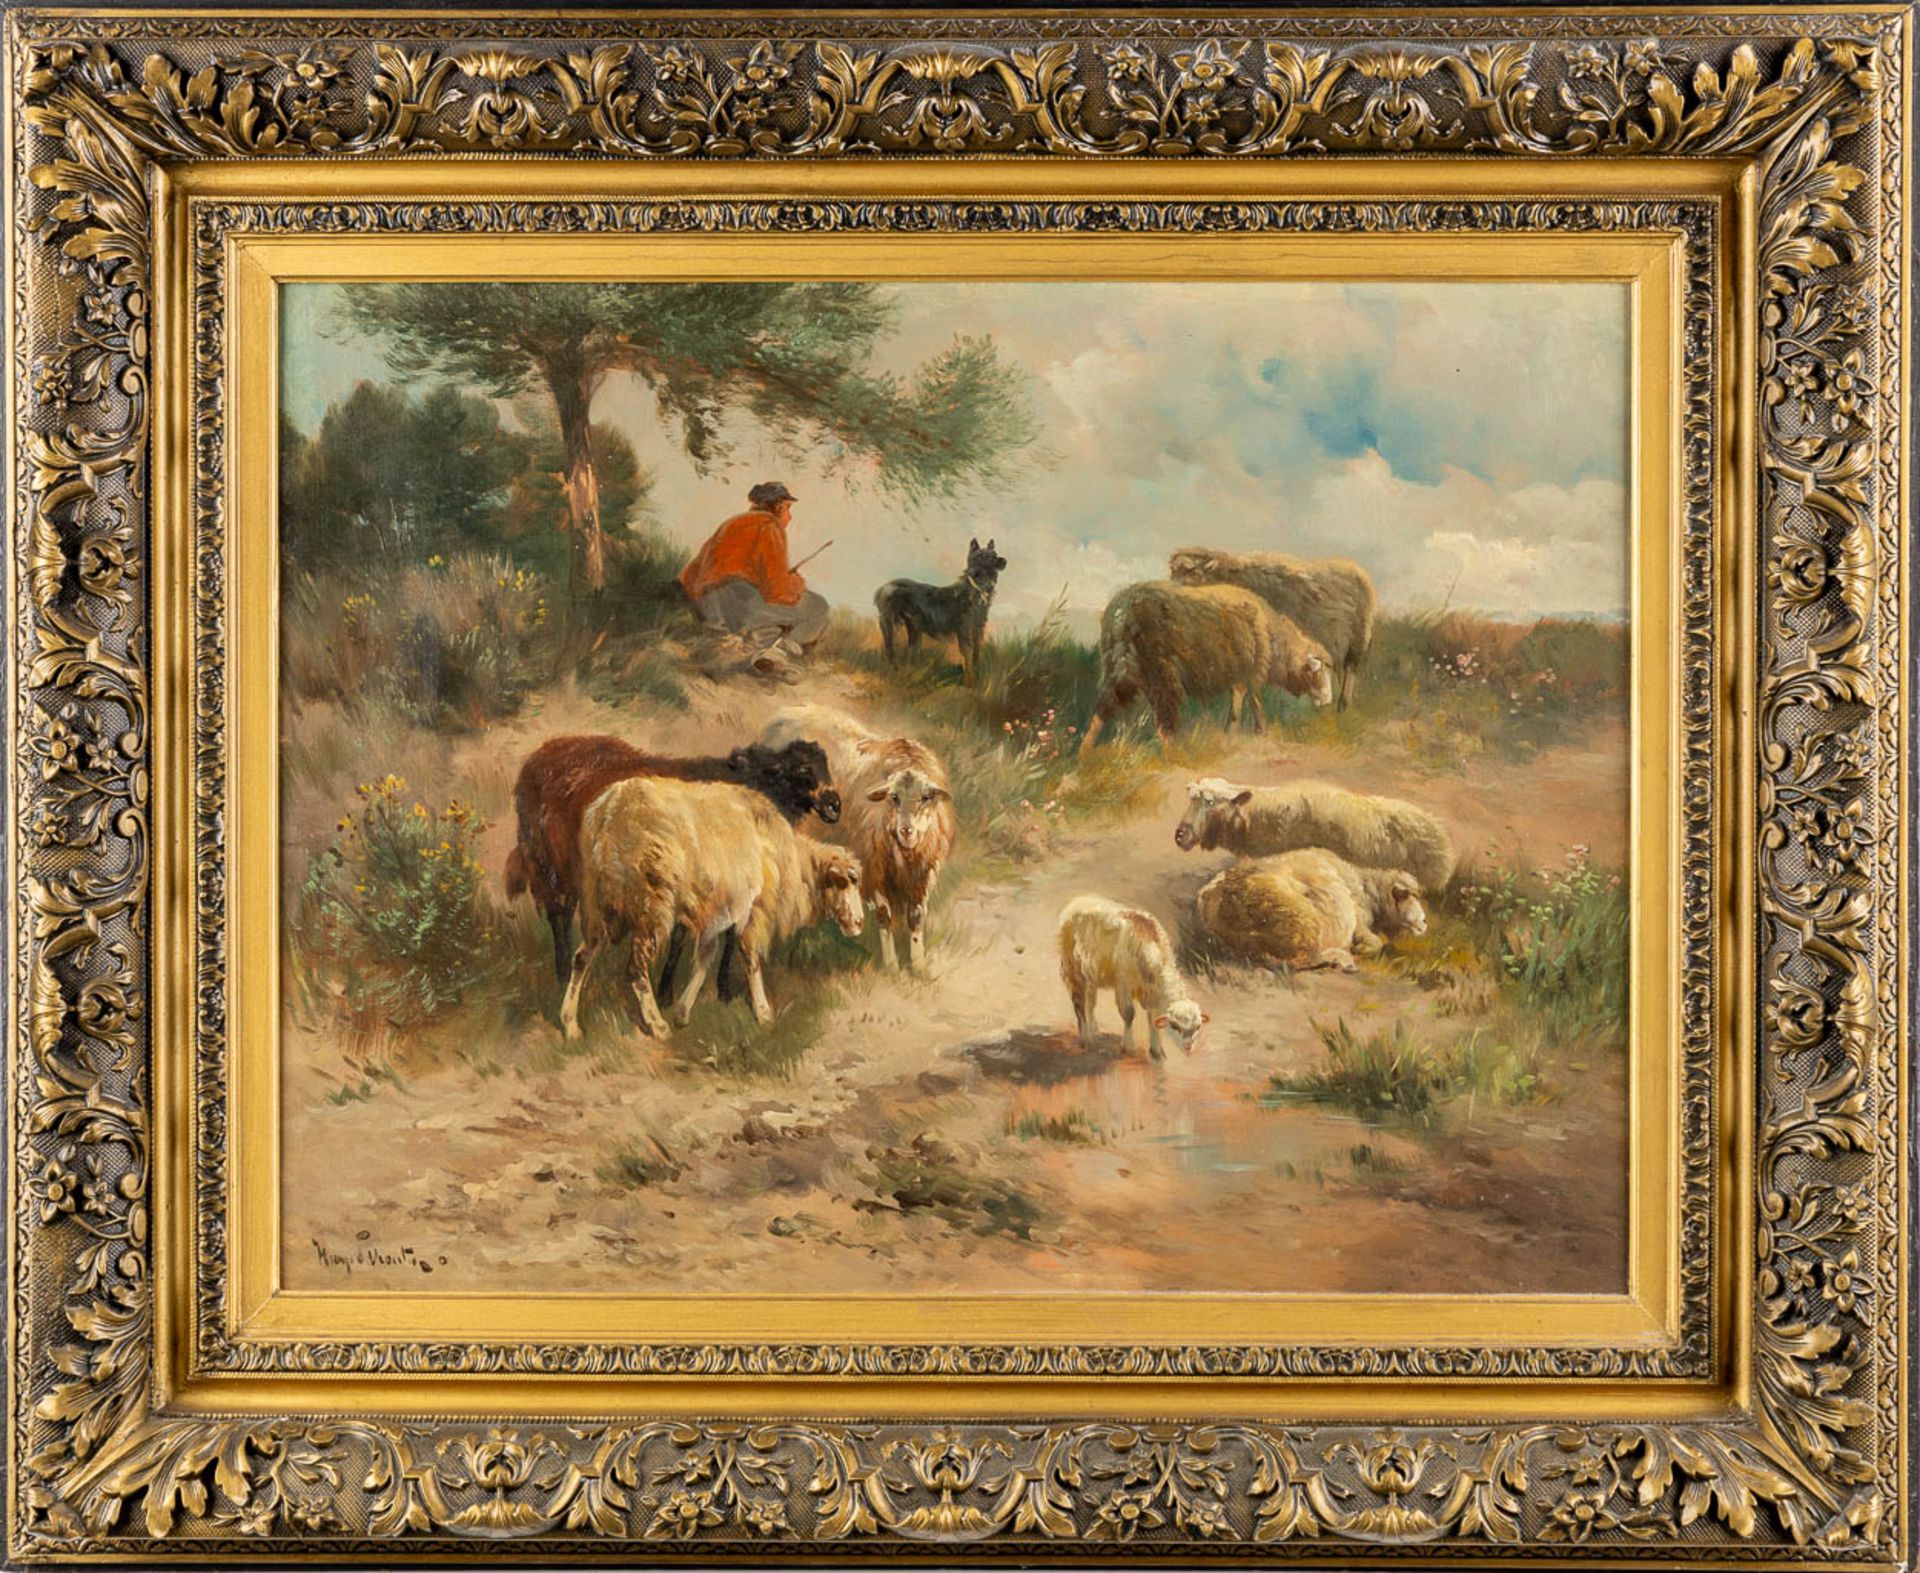 Henry SCHOUTEN (1857/64-1927) 'Sheep herder on the look' oil on canvas. (W:80 x H:60 cm) - Image 3 of 9